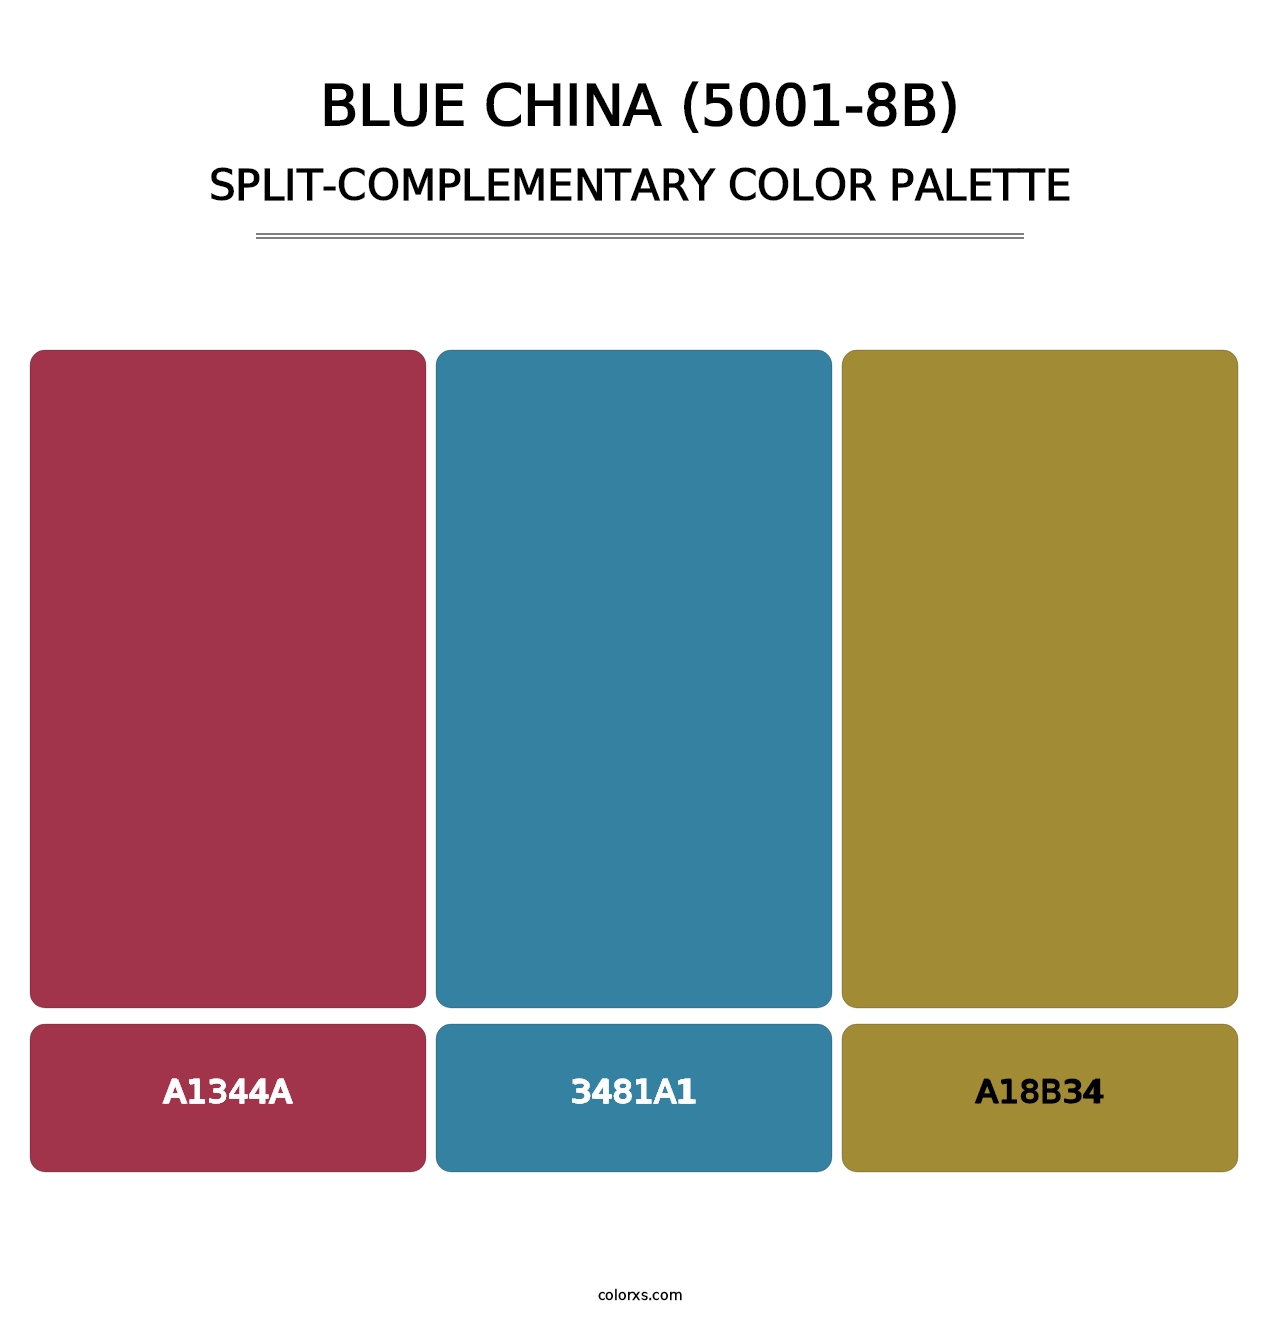 Blue China (5001-8B) - Split-Complementary Color Palette